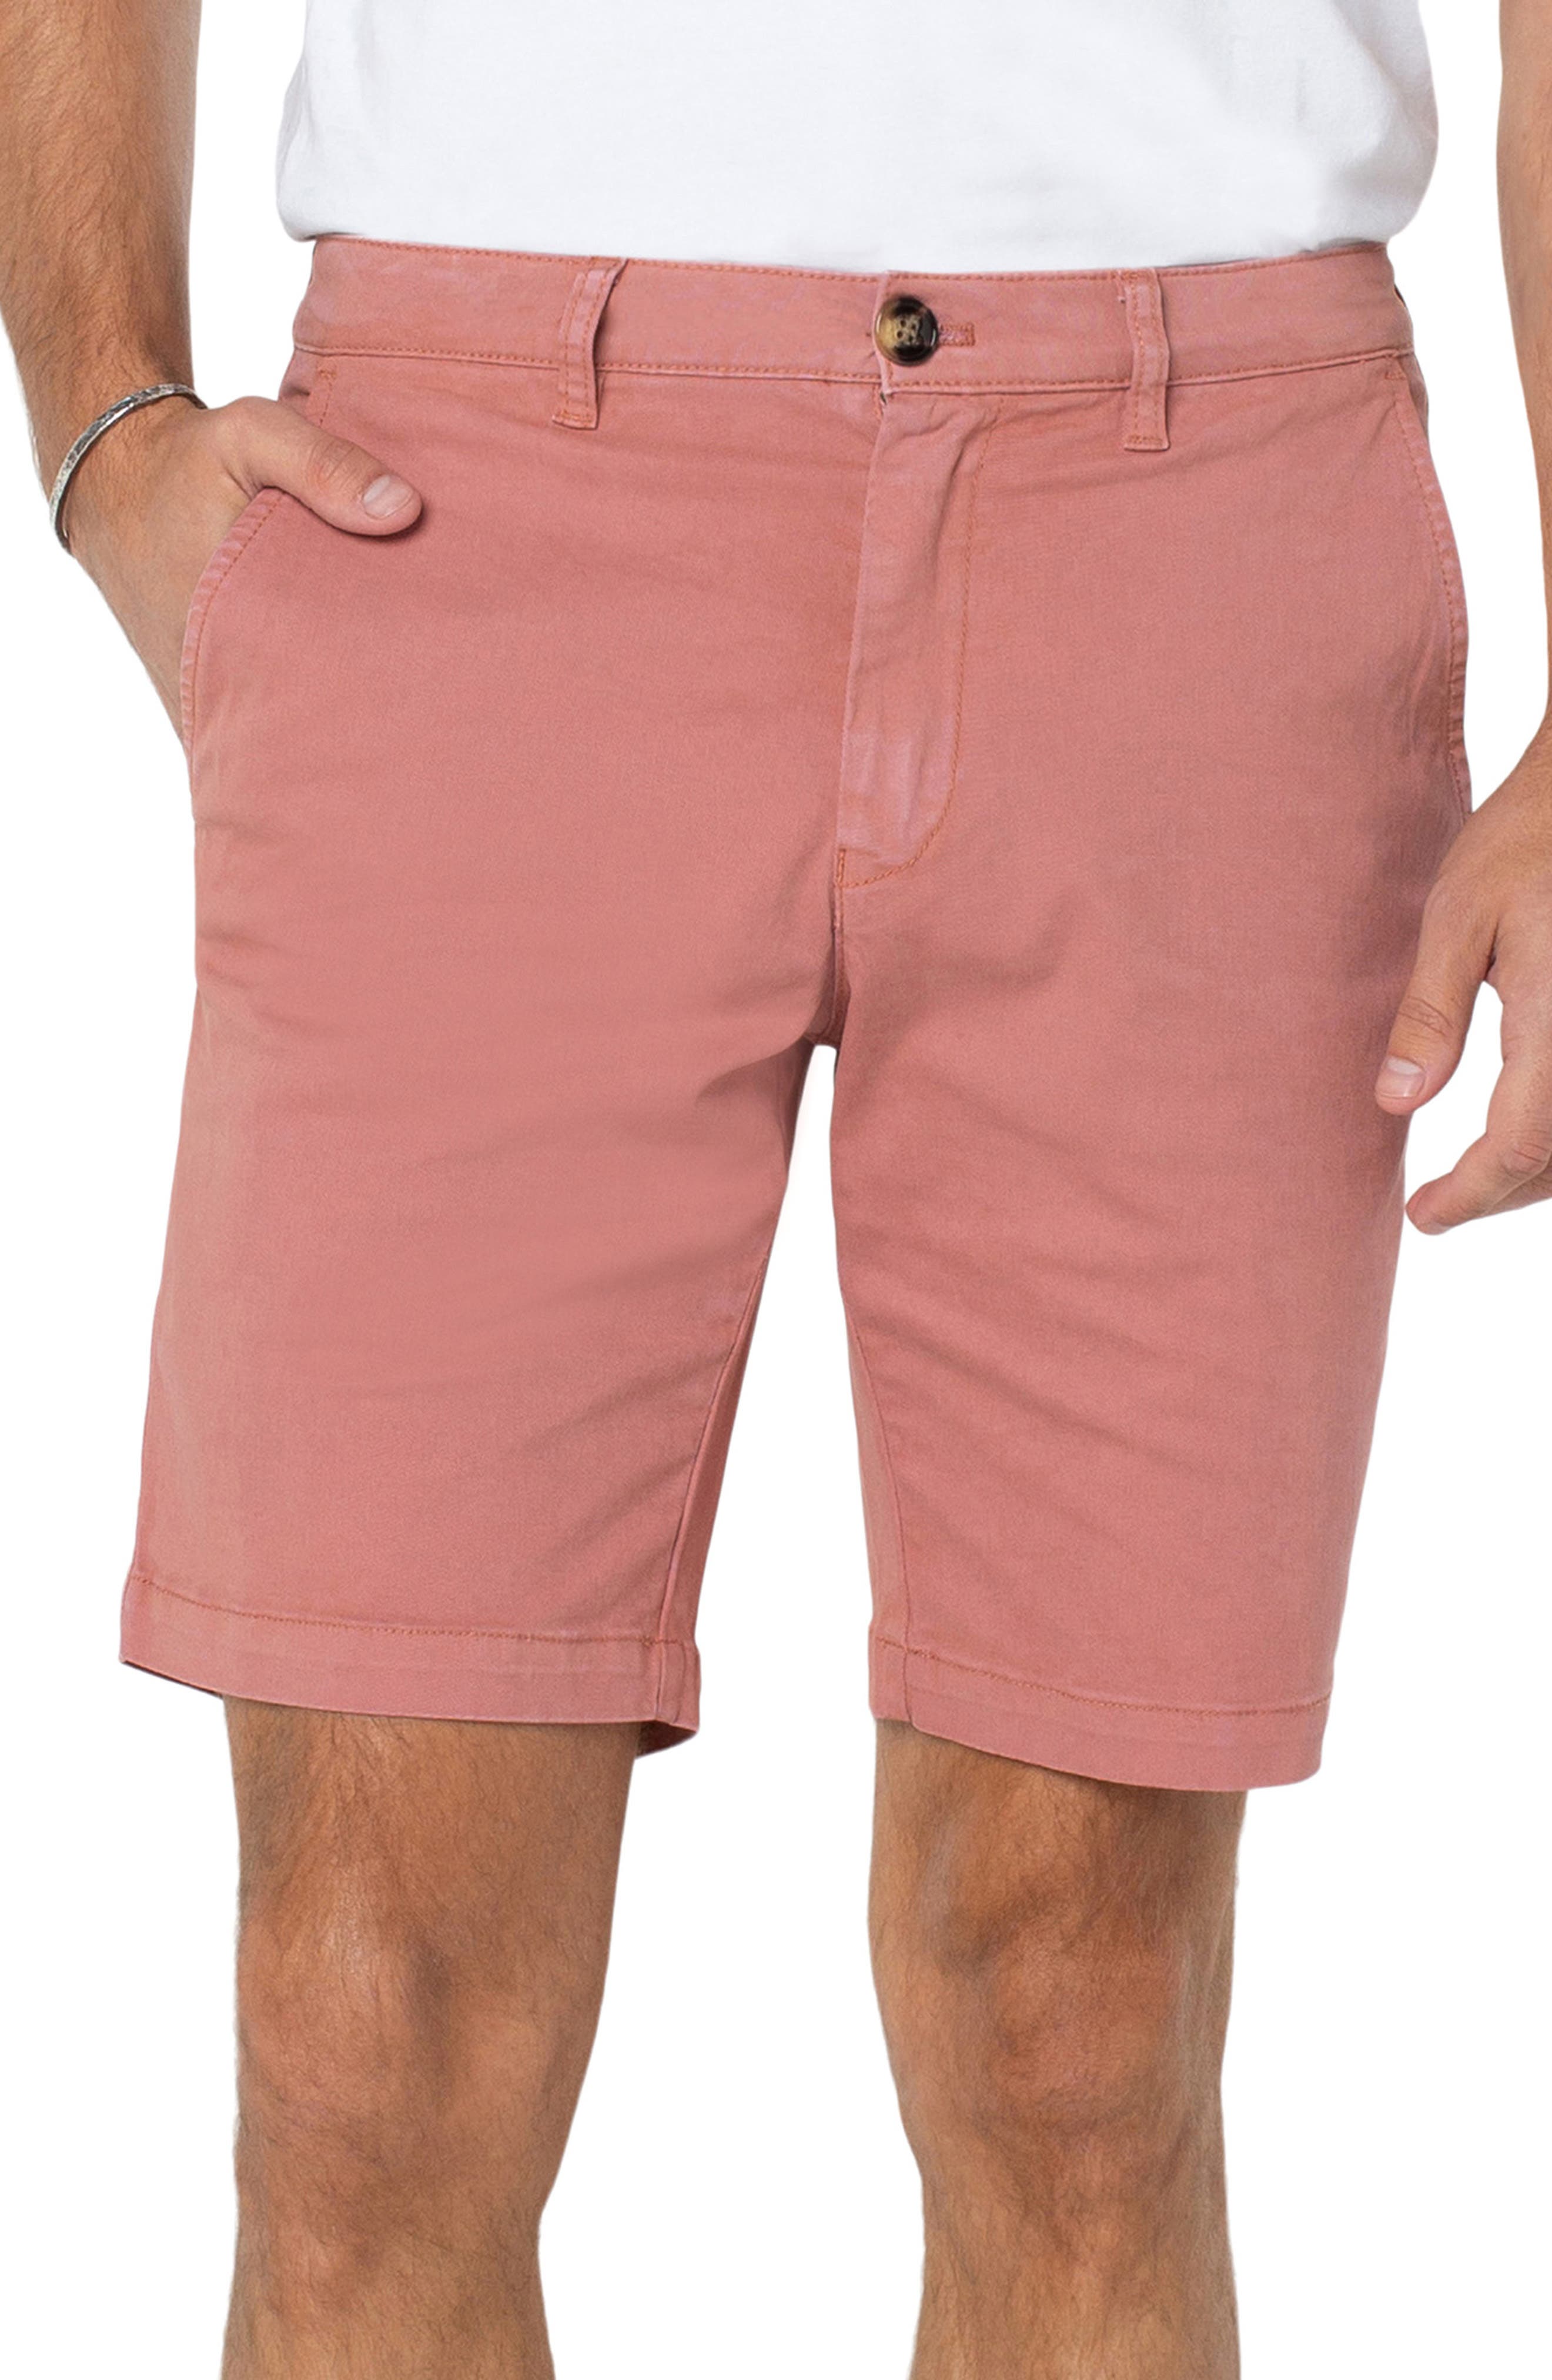 Chaps Flat Front Pink Casual Cotton Shorts Men's NWT 